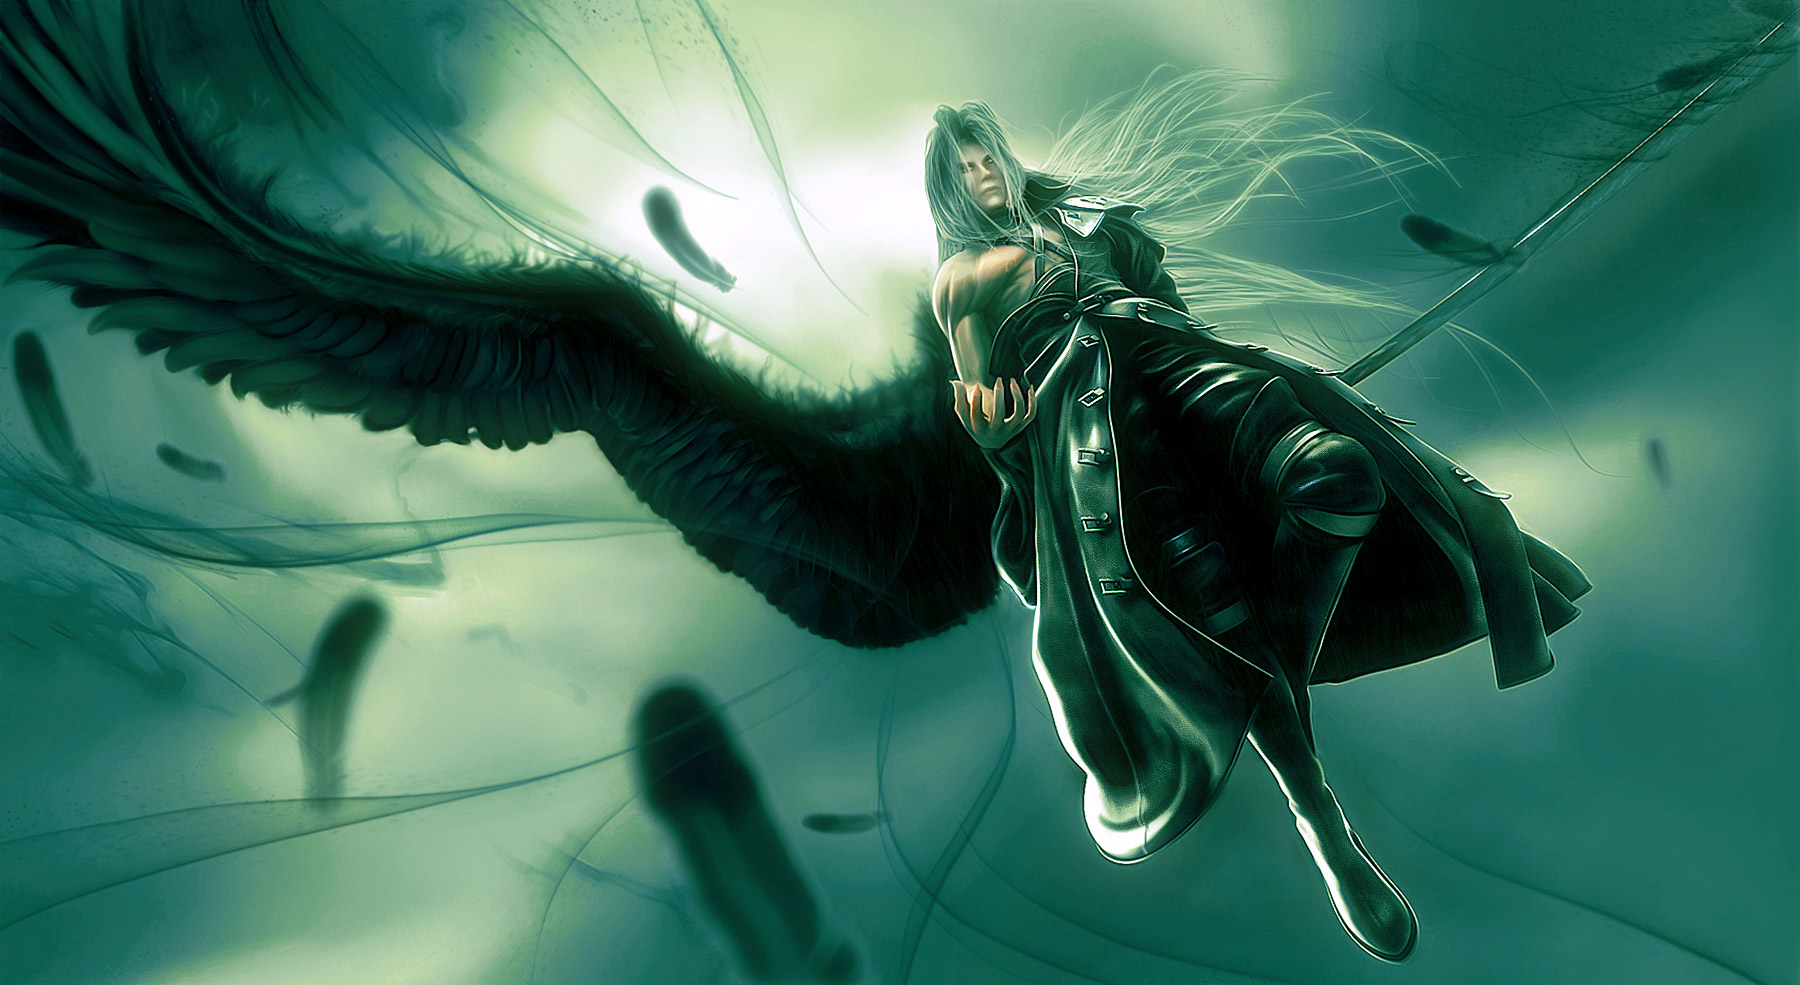 Sephiroth Wallpaper Submited Image